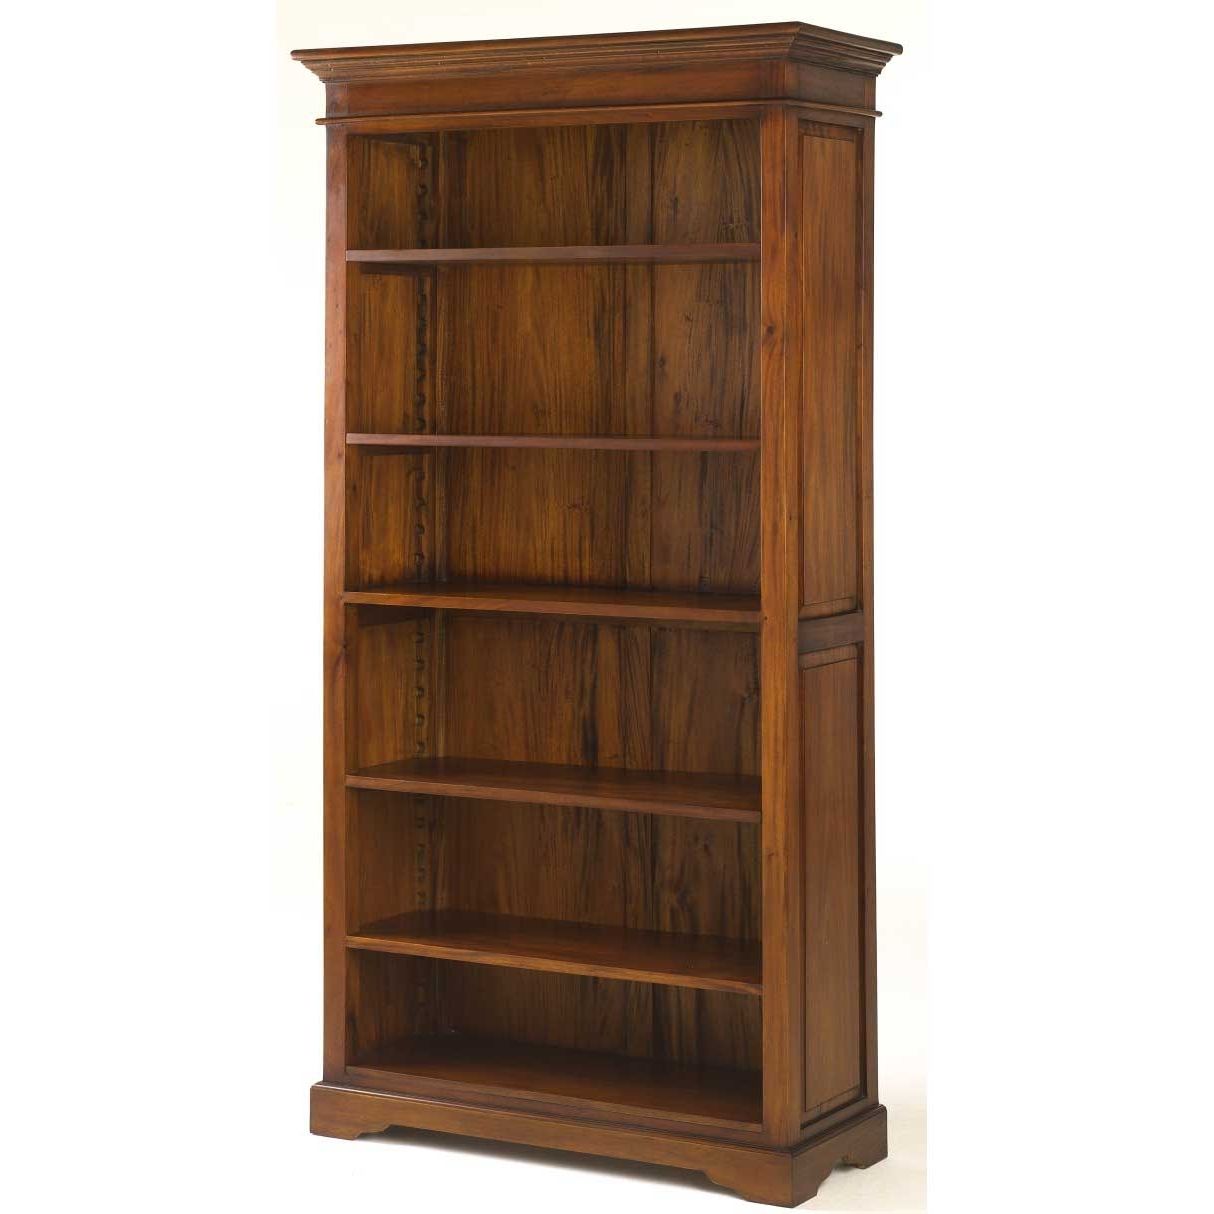 Bookcases Ideas: Ten Real Wood Bookcases With High Quality Mission In Most Current High Quality Bookshelves (View 2 of 15)